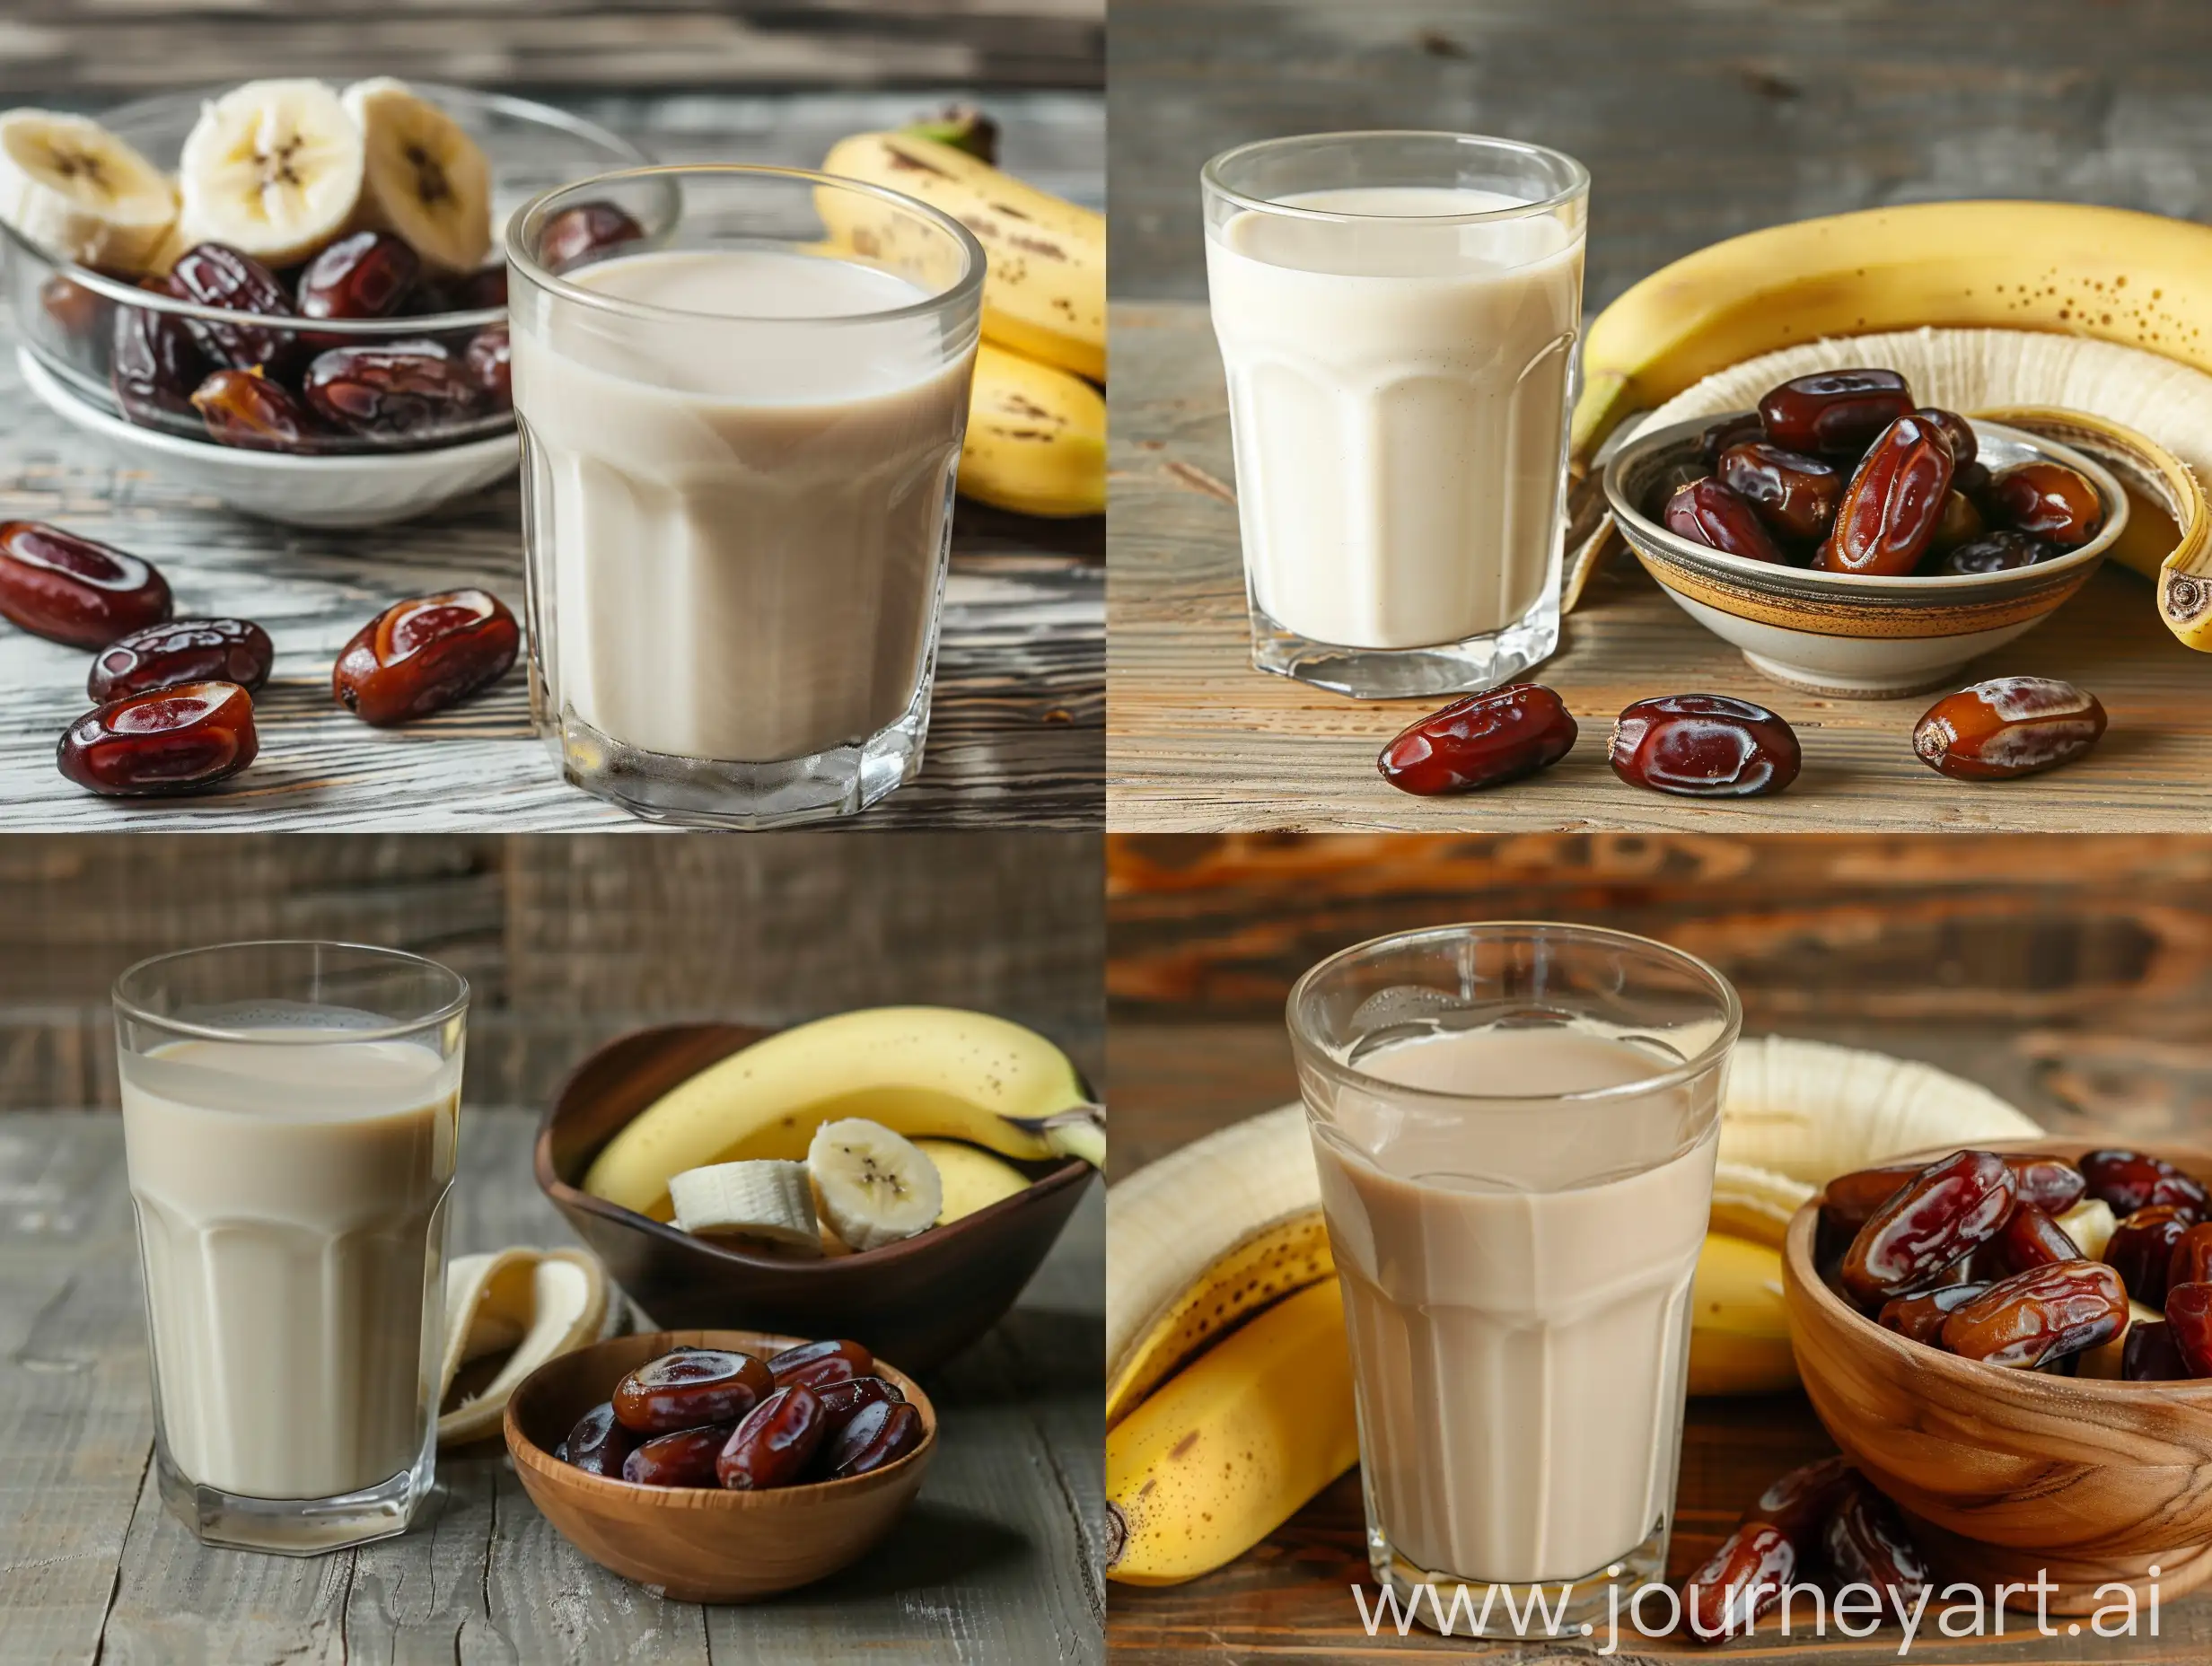 Real photo of a glass of banana milk and dates next to a bowl of bananas and dates on a wooden table